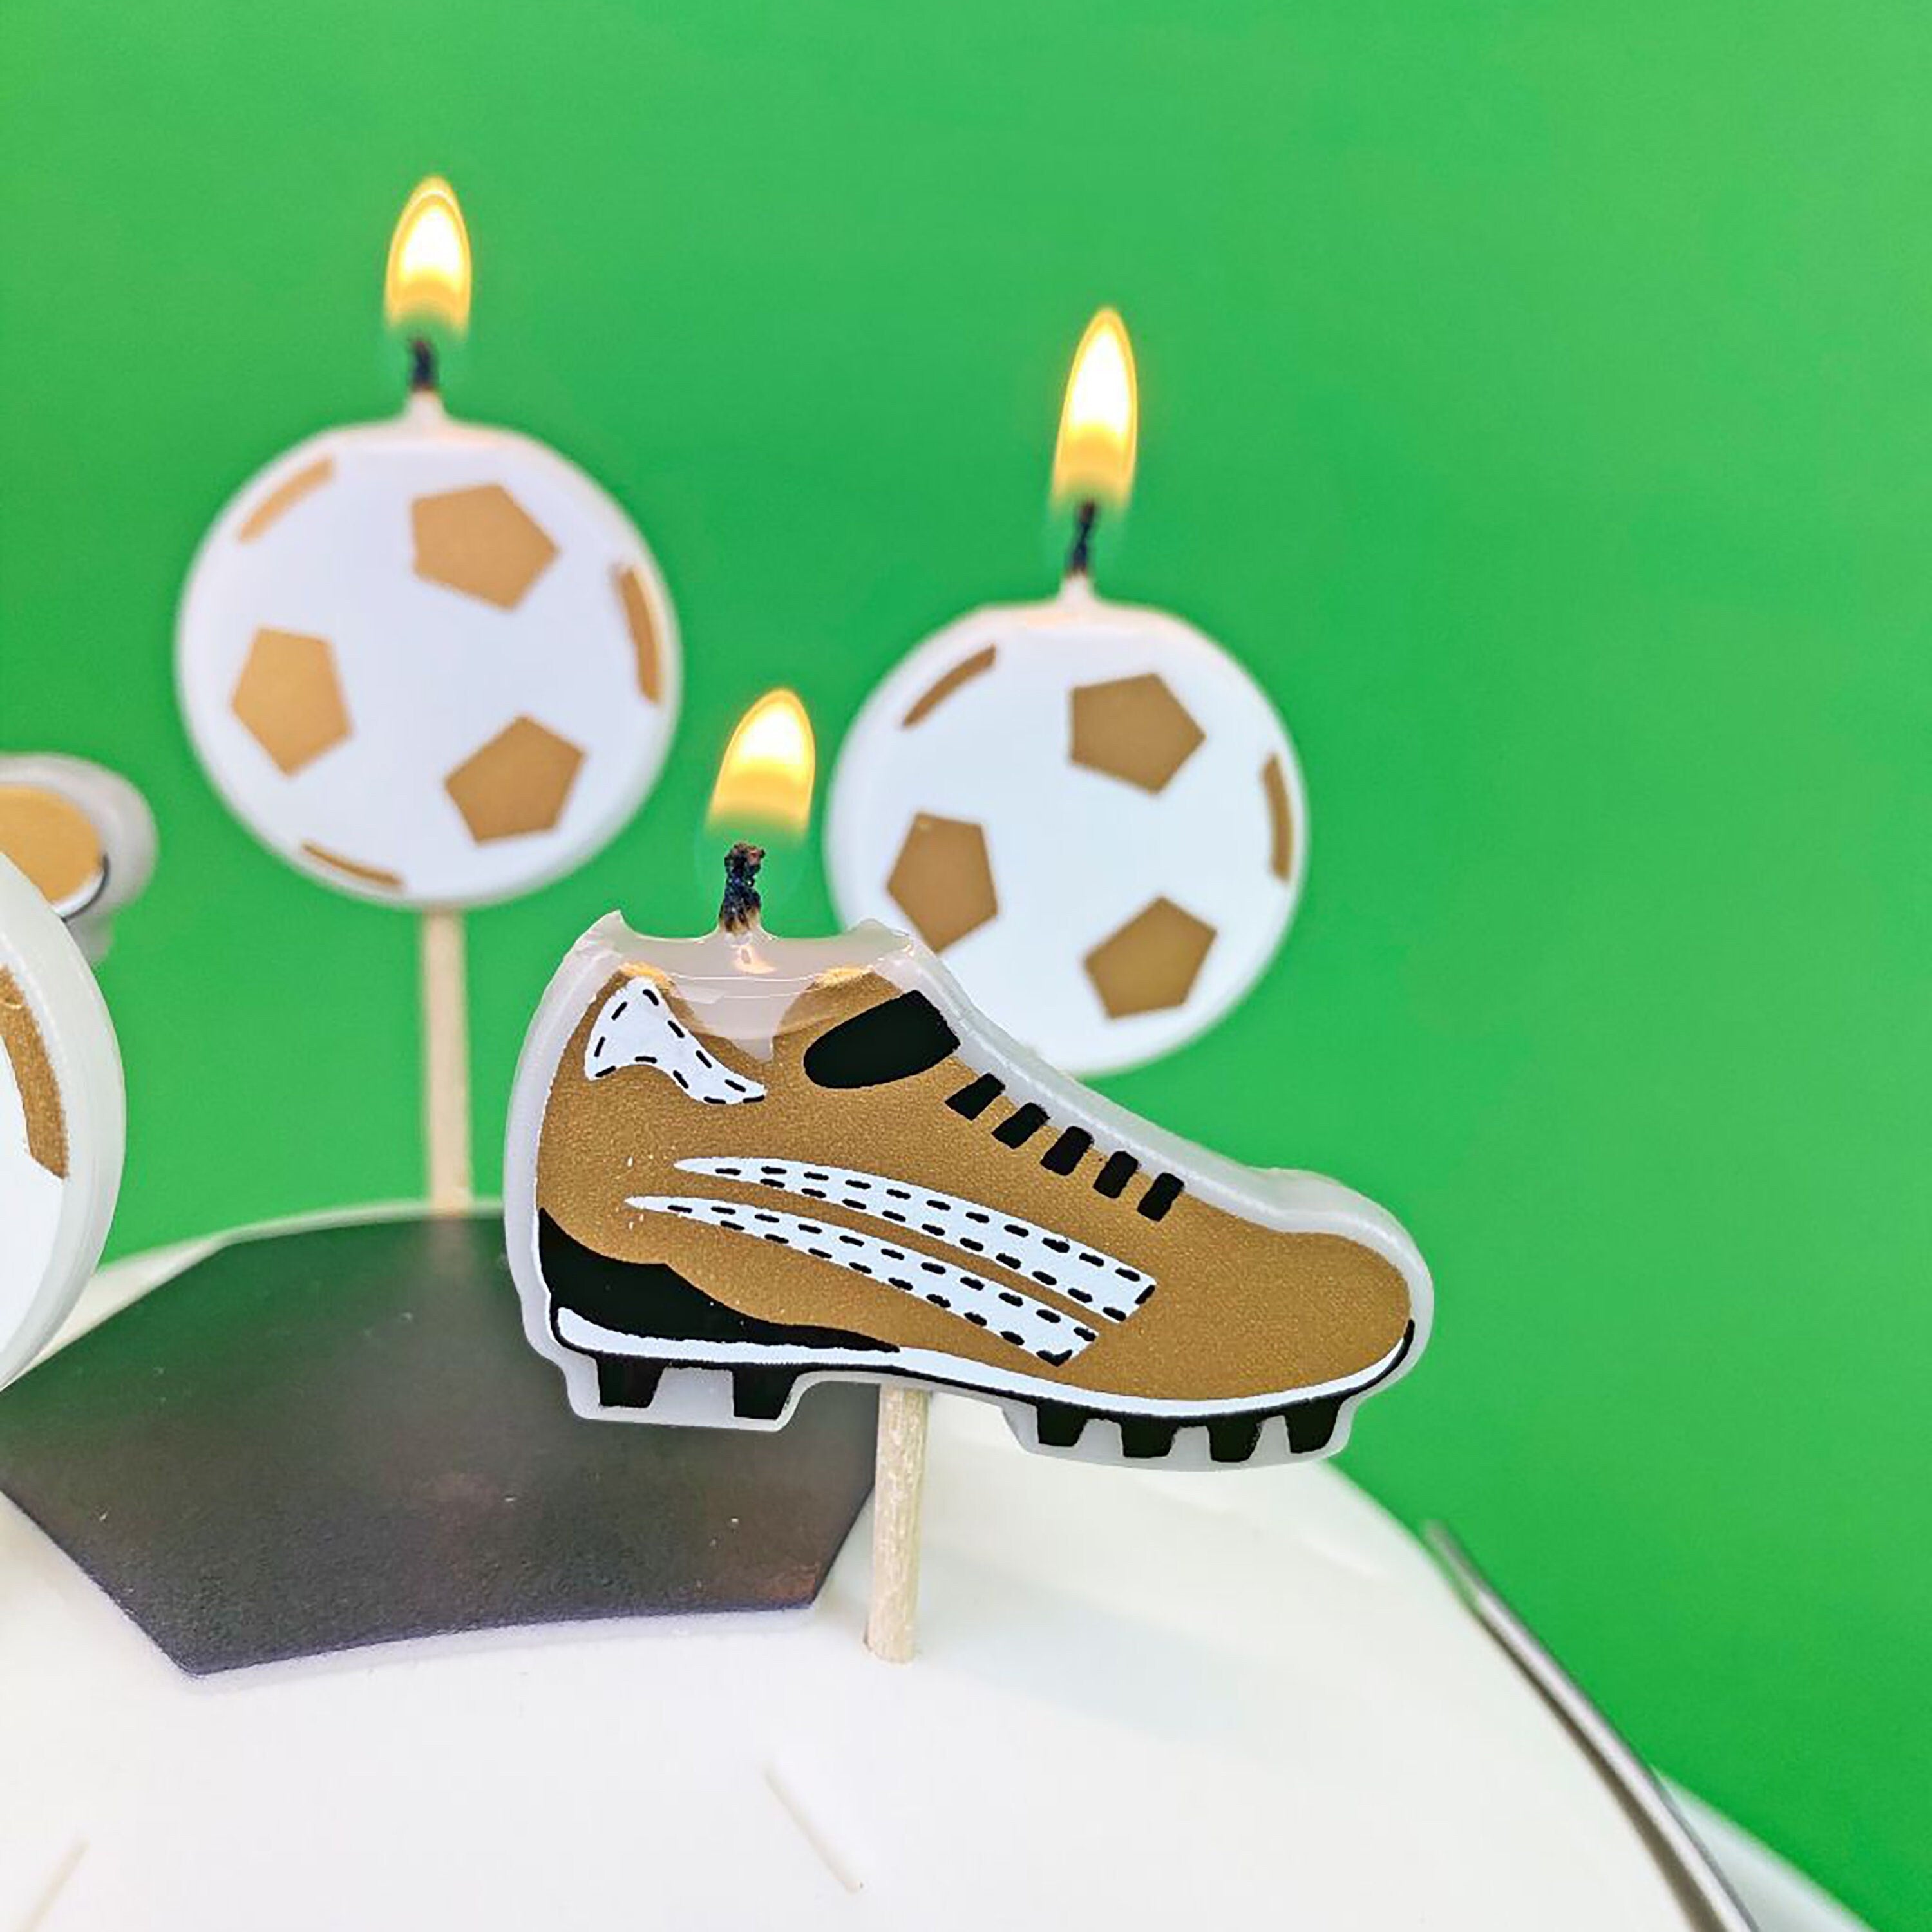 Soccer Birthday Candles | Soccer Birthday Party - Sports Party Theme - Soccer Birthday - Soccer Party Theme -Soccer Party Supplies